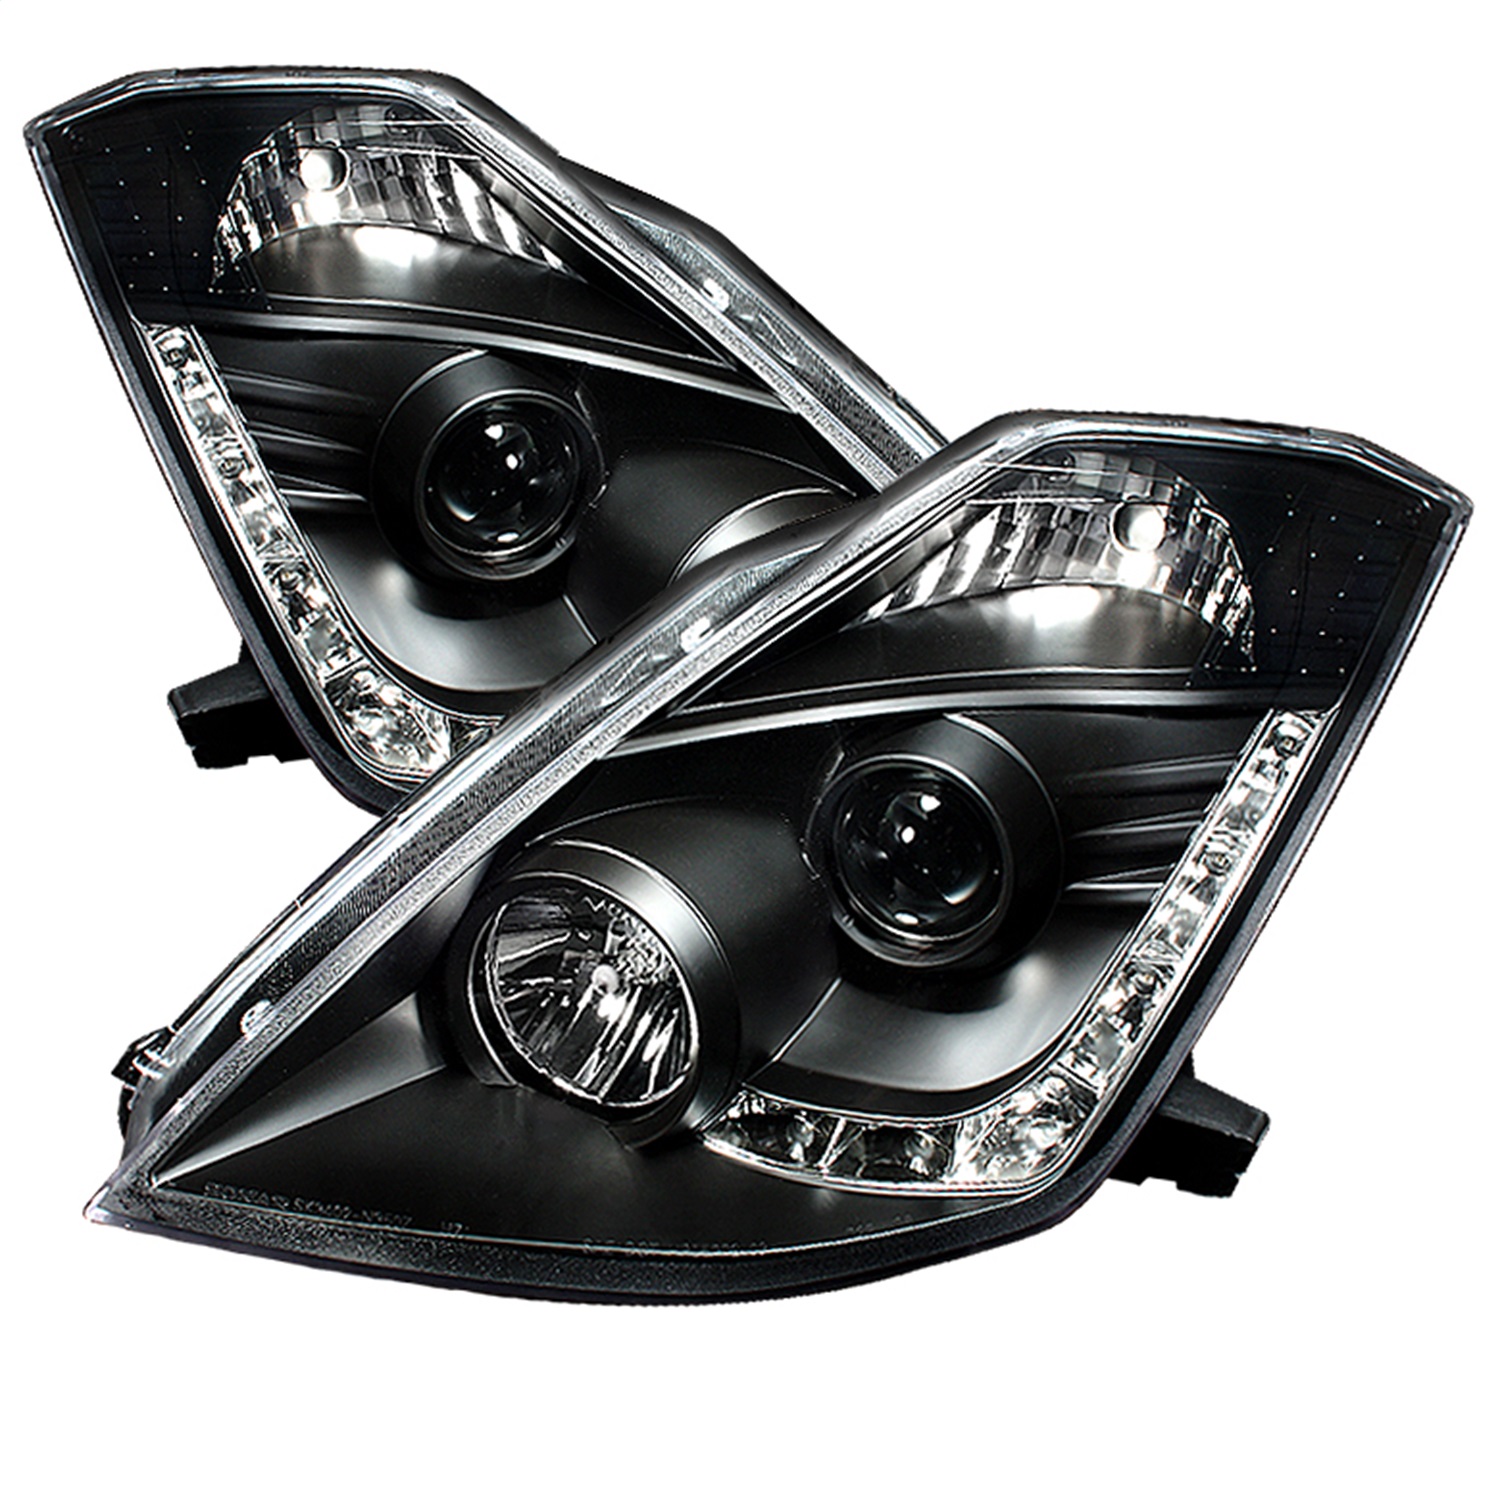 Spyder Auto 5032225 DRL LED Projector Headlights Fits 03-05 350Z